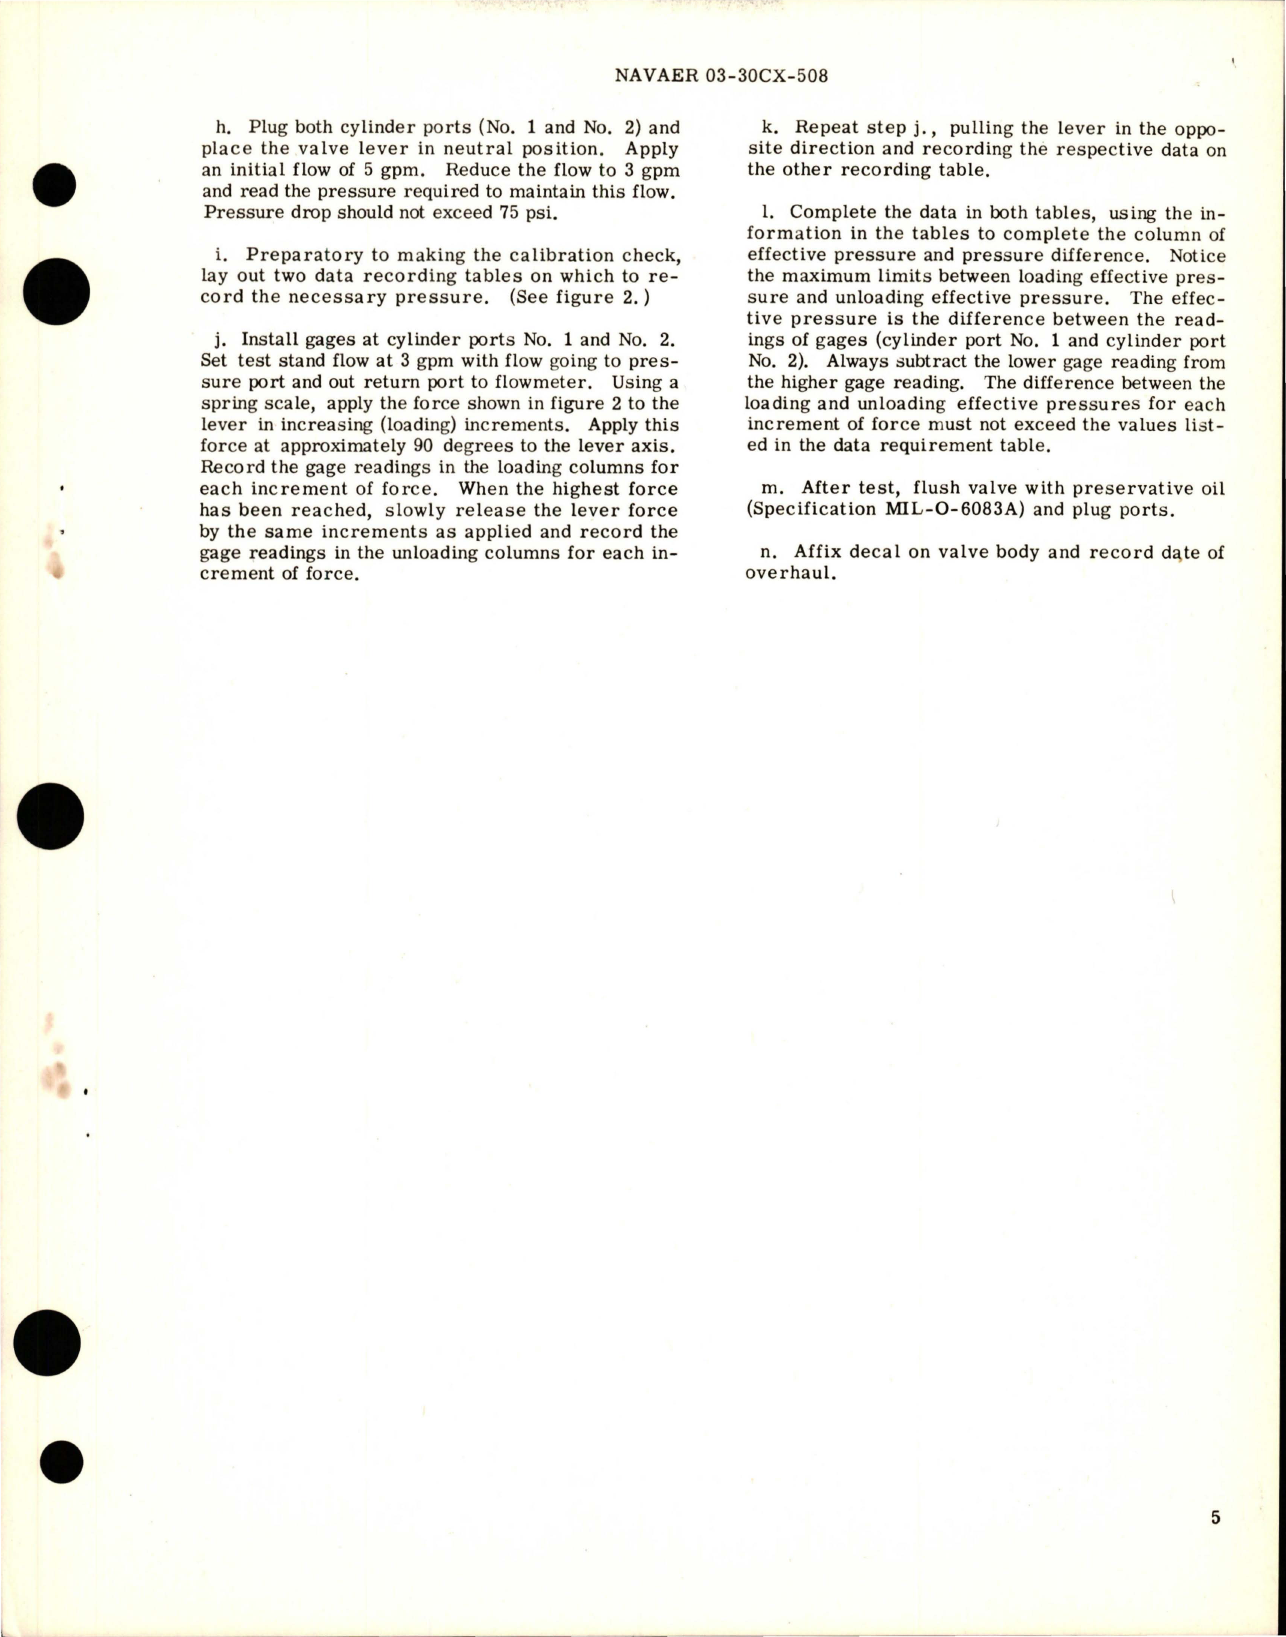 Sample page 5 from AirCorps Library document: Overhaul Instructions with Parts Breakdown for Hydraulic Elevator Boost Valve Assembly - 175-58707-60 